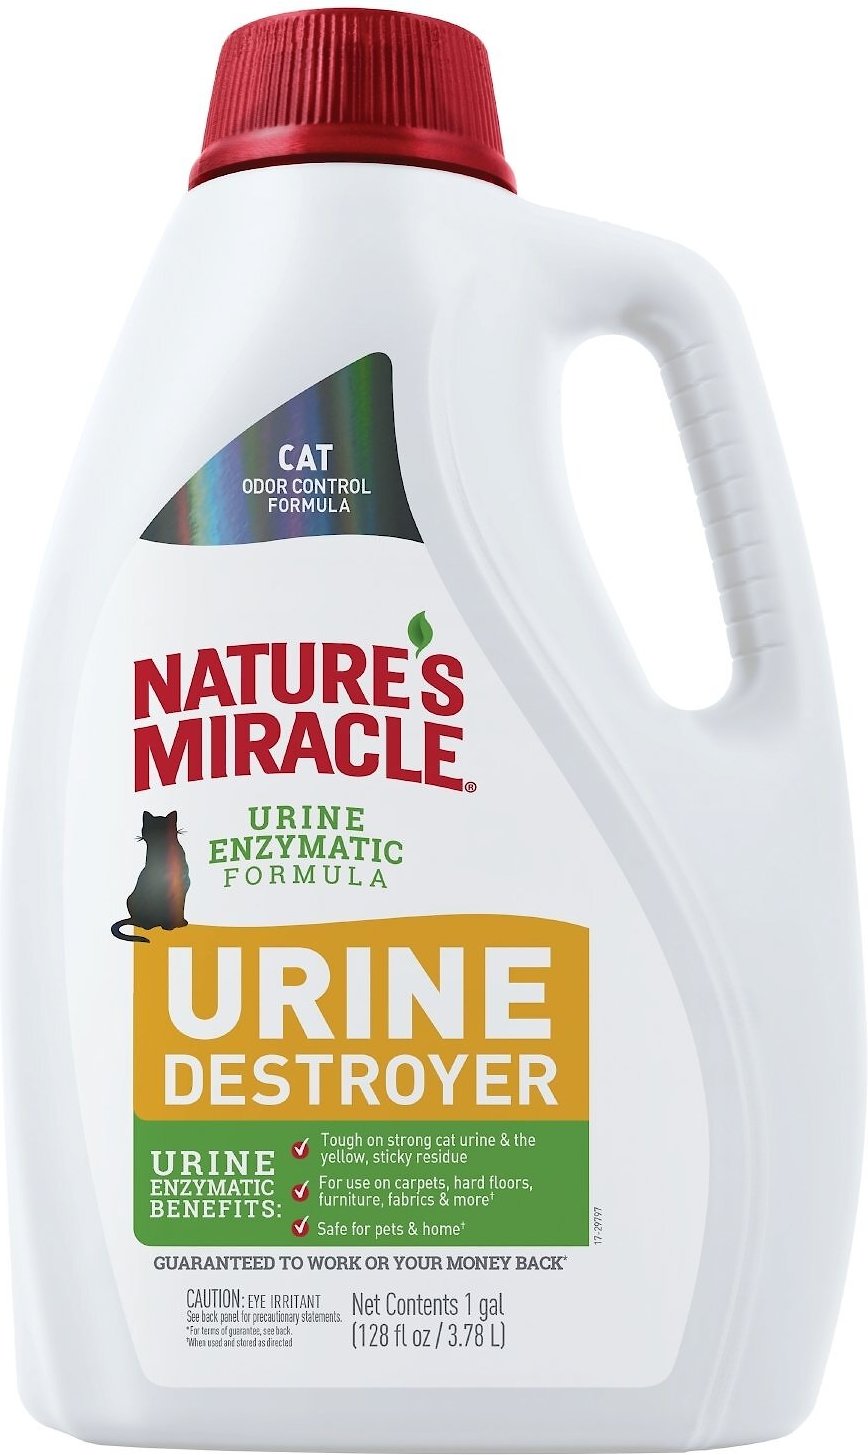 NATURE'S MIRACLE Cat Enzymatic Urine Destroyer, 1gal bottle